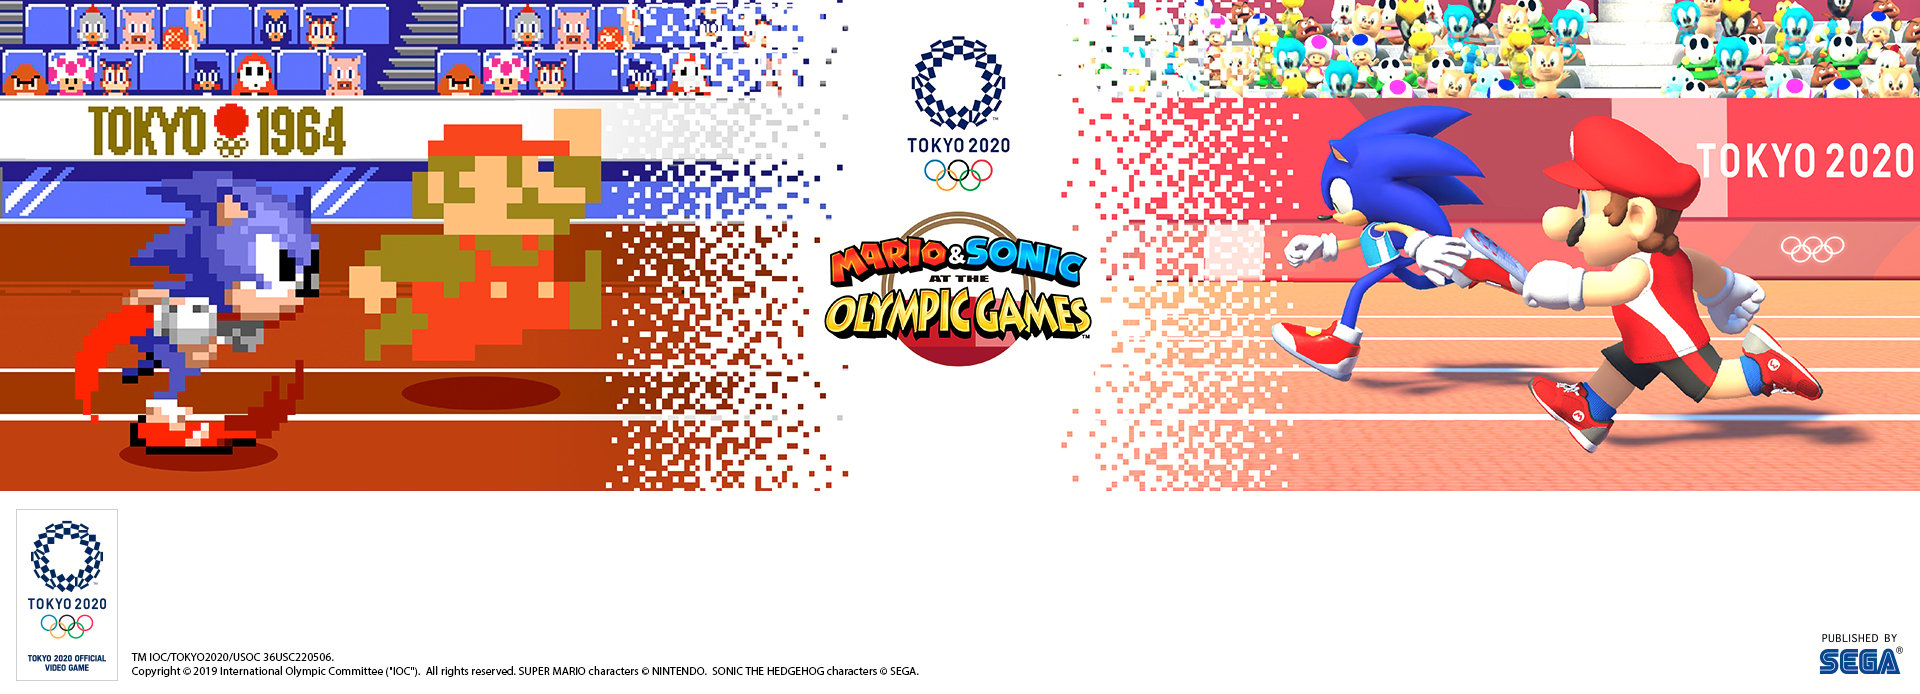 Mario & Sonic at the Olympic Games Tokyo 2020 Reveals